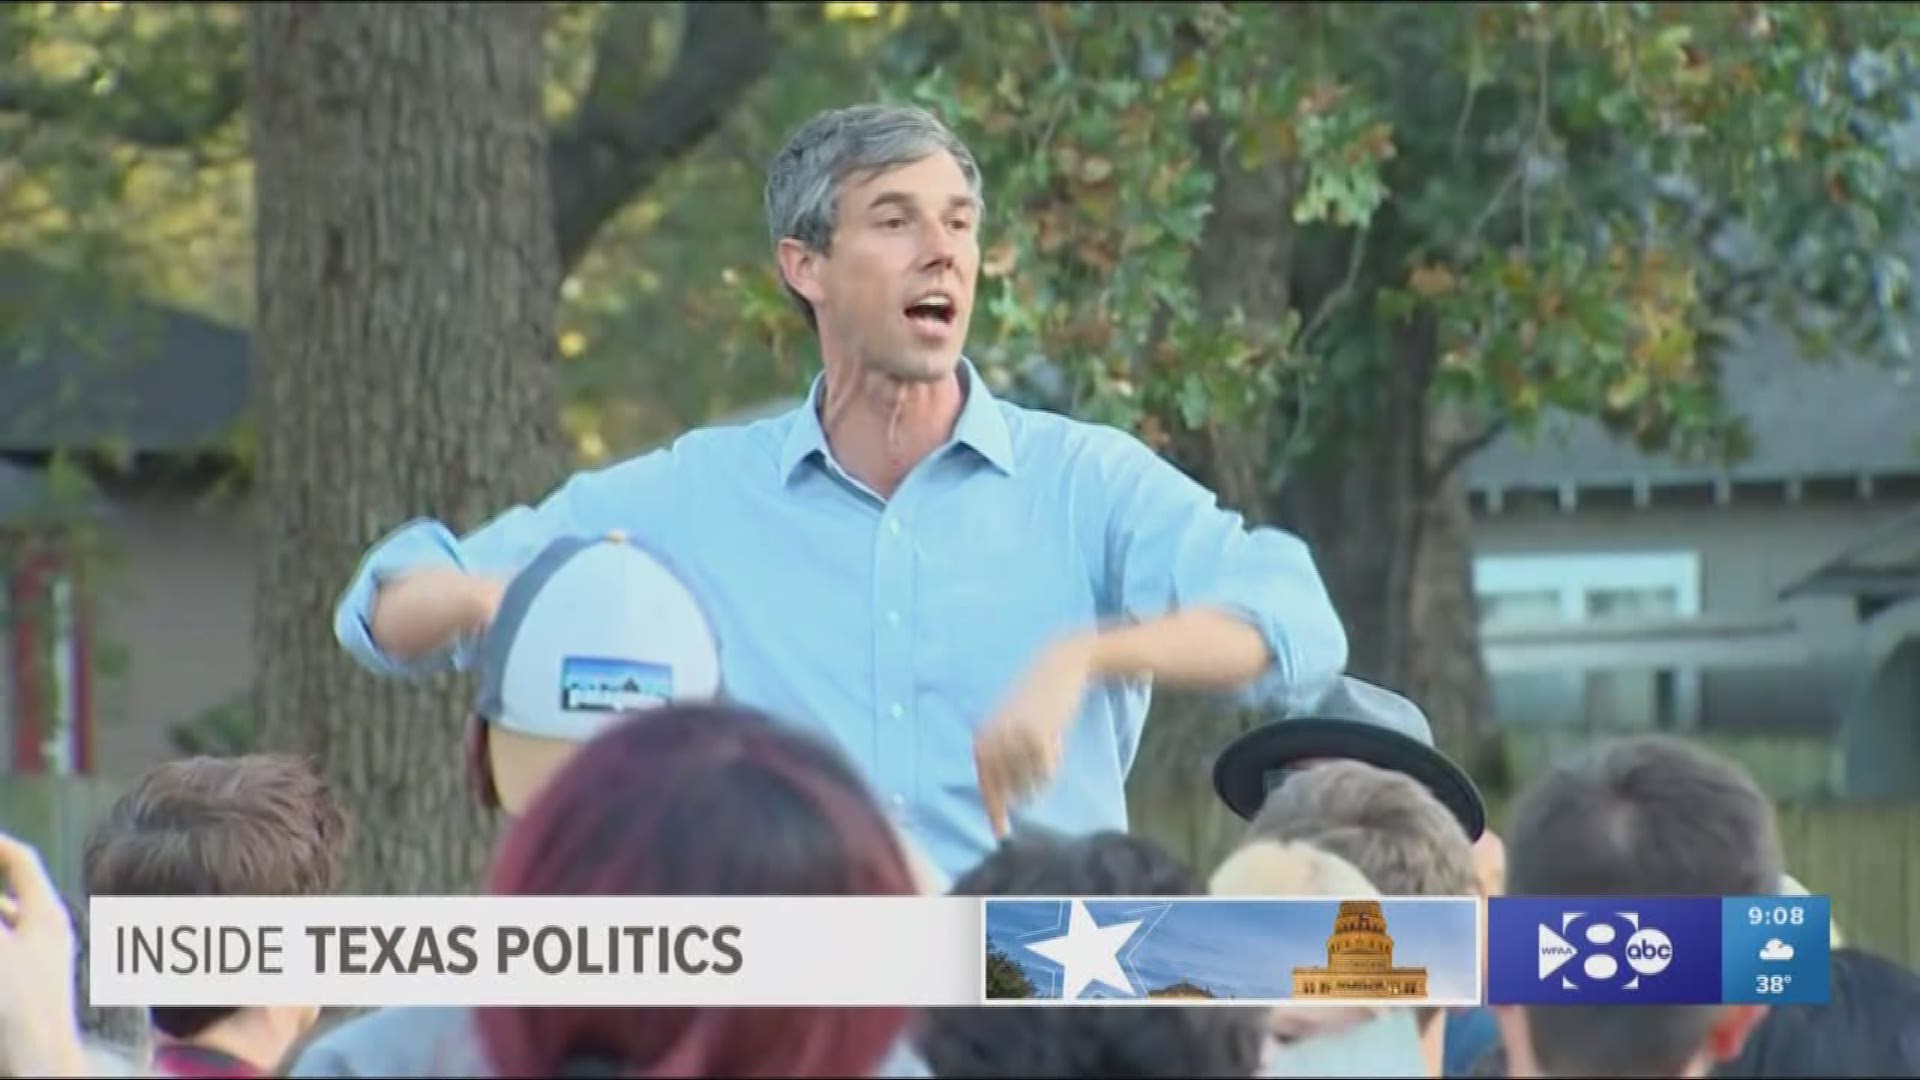 Another Texan who might run against President Donald Trump in 2020 is Congressman Beto O'Rourke. O'Rourke insisted in an interview with Inside Texas Politics that he would not run for president next year. In the last few weeks, he has reconsidered that st